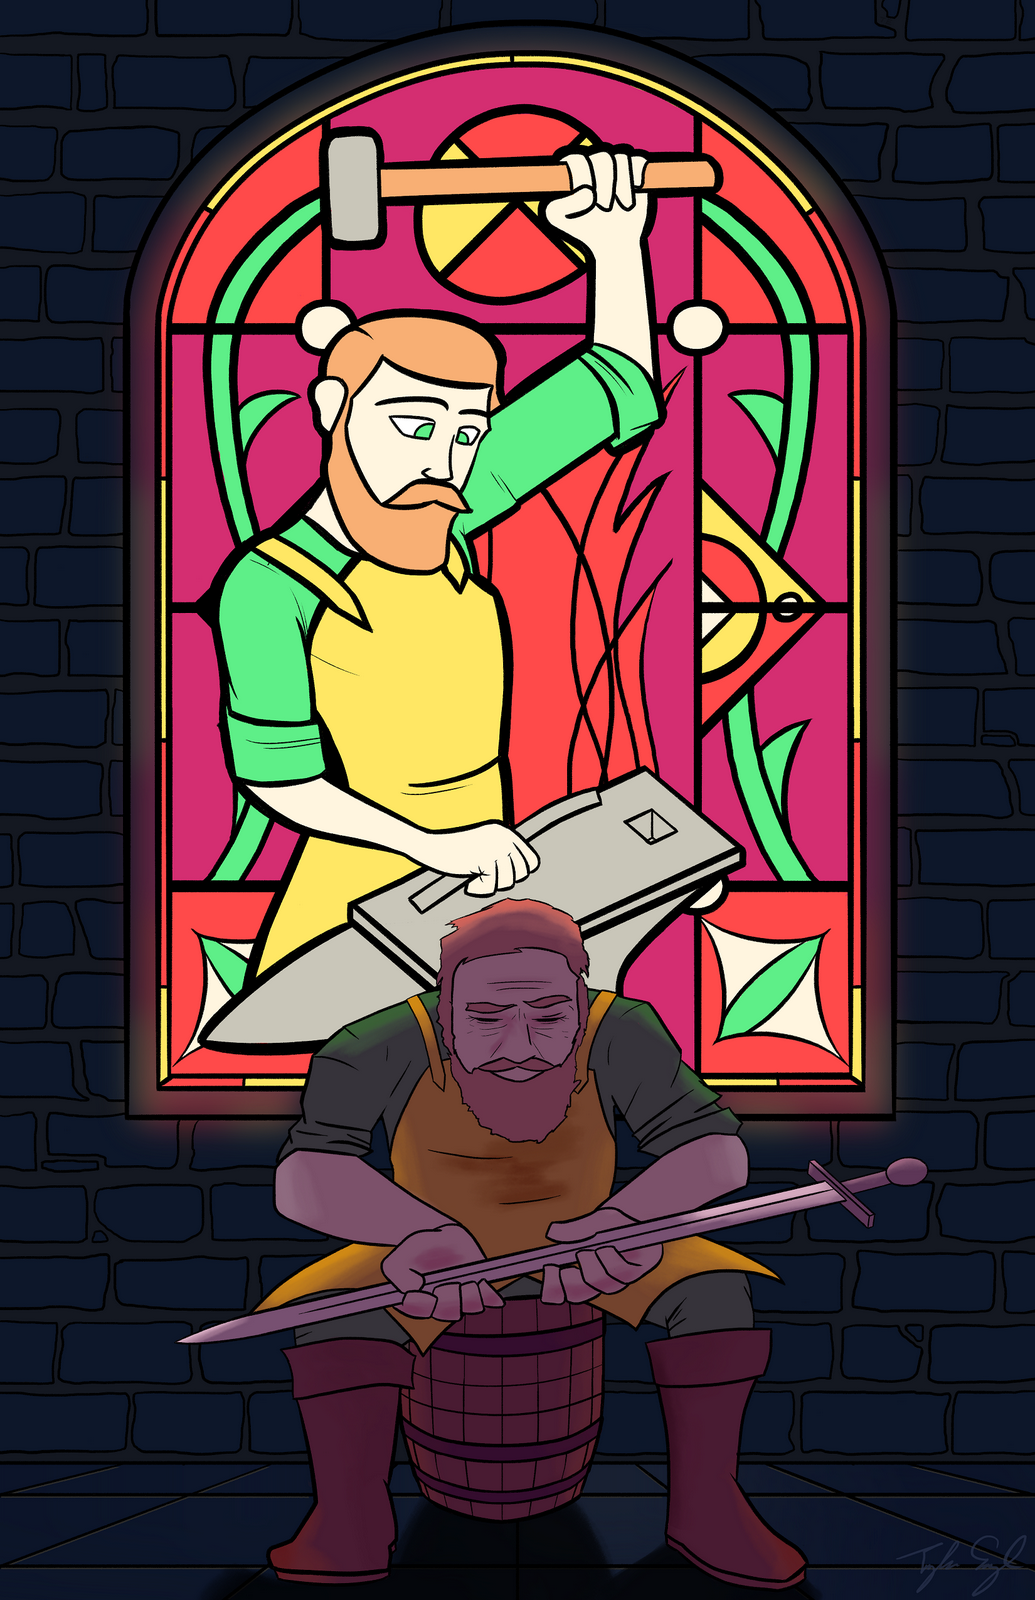 A blacksmith sits sadly below a stained glass window of his glory days.